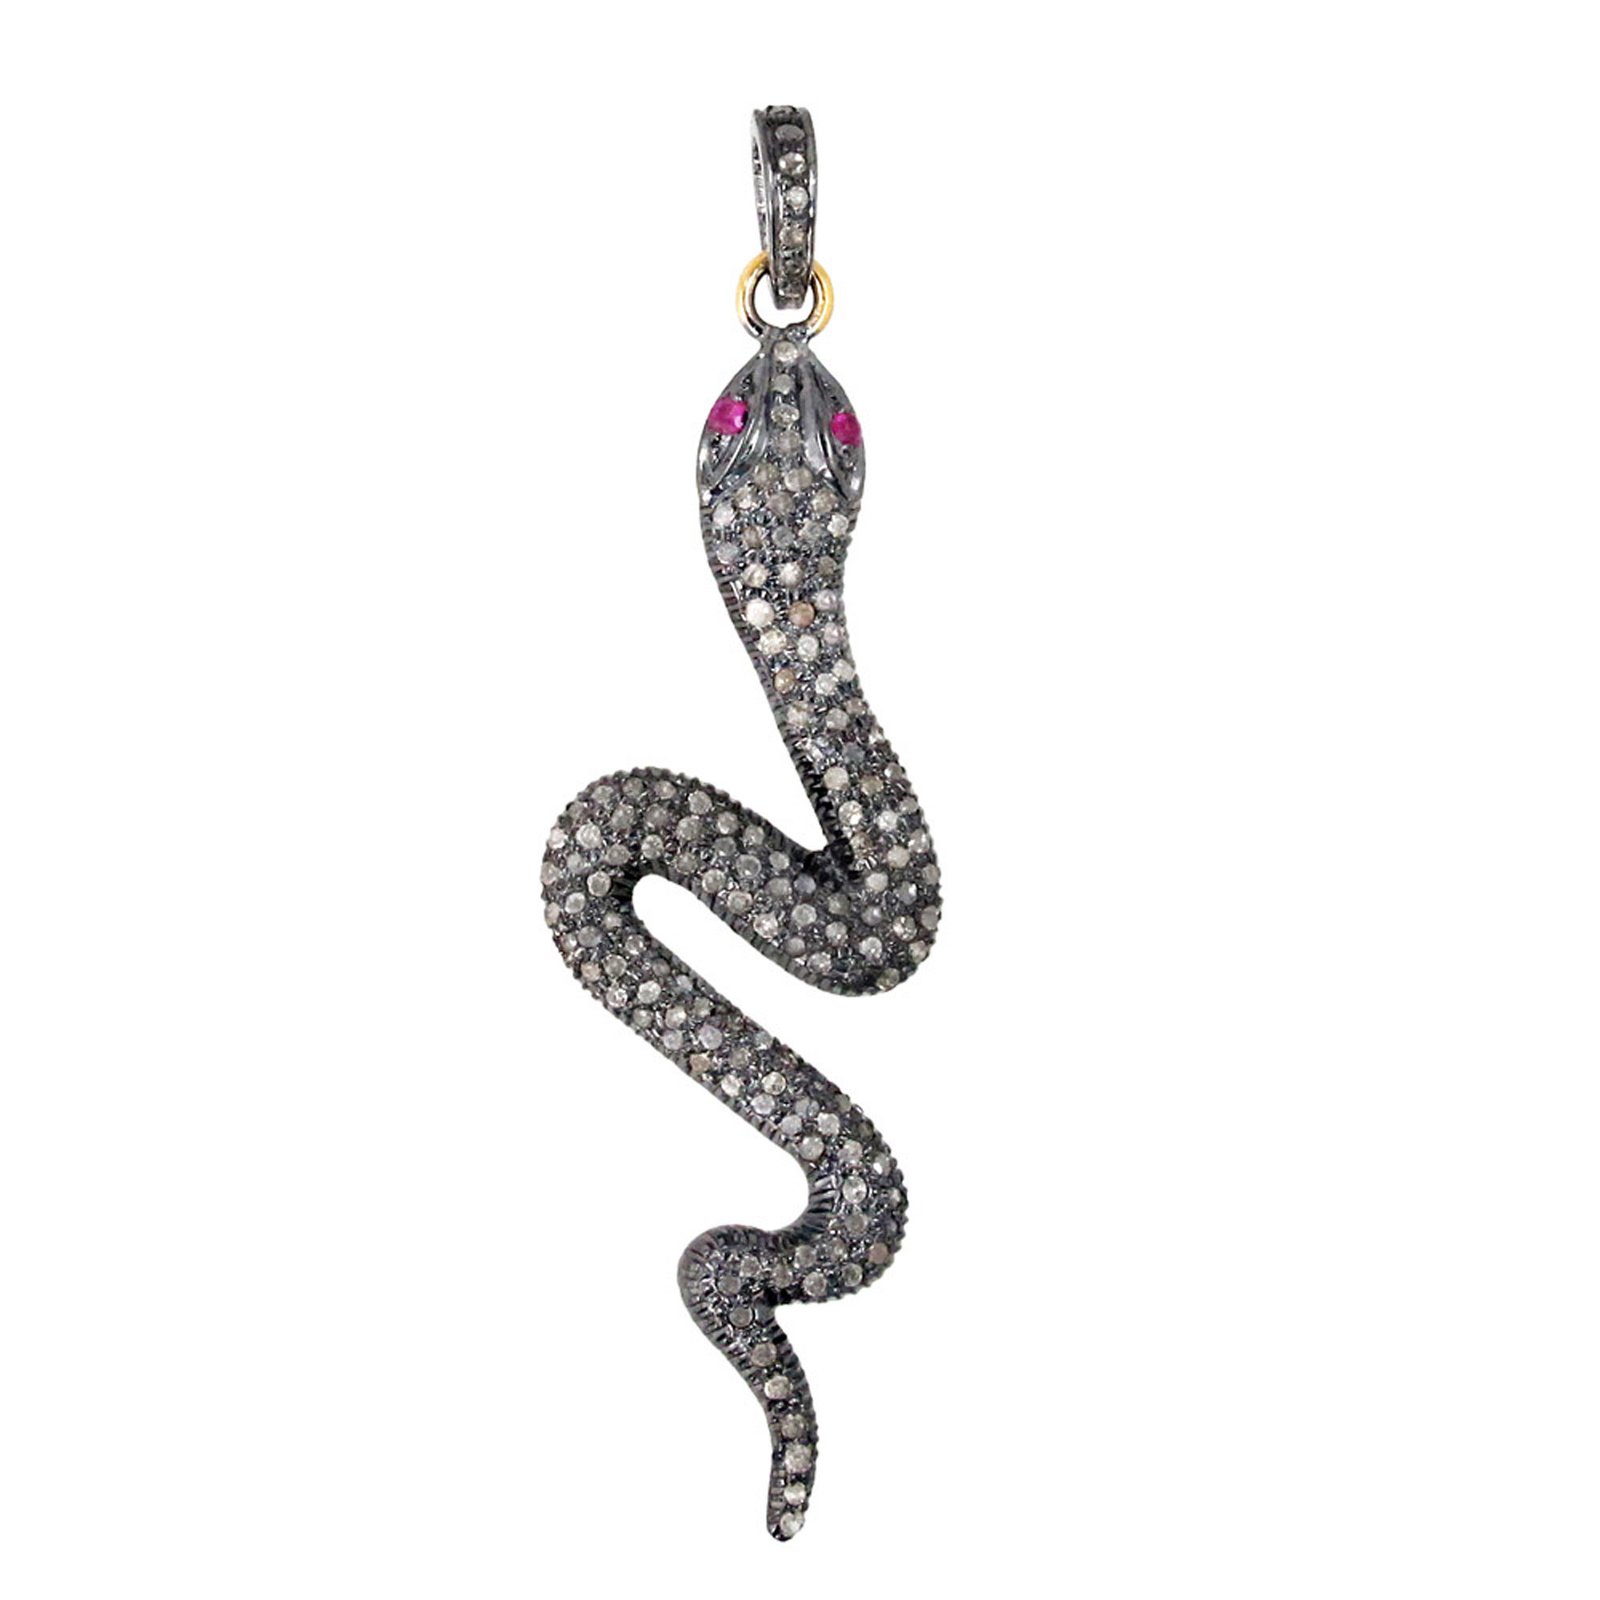 Solid gold & silver diamond snake pendant vintage jewelry